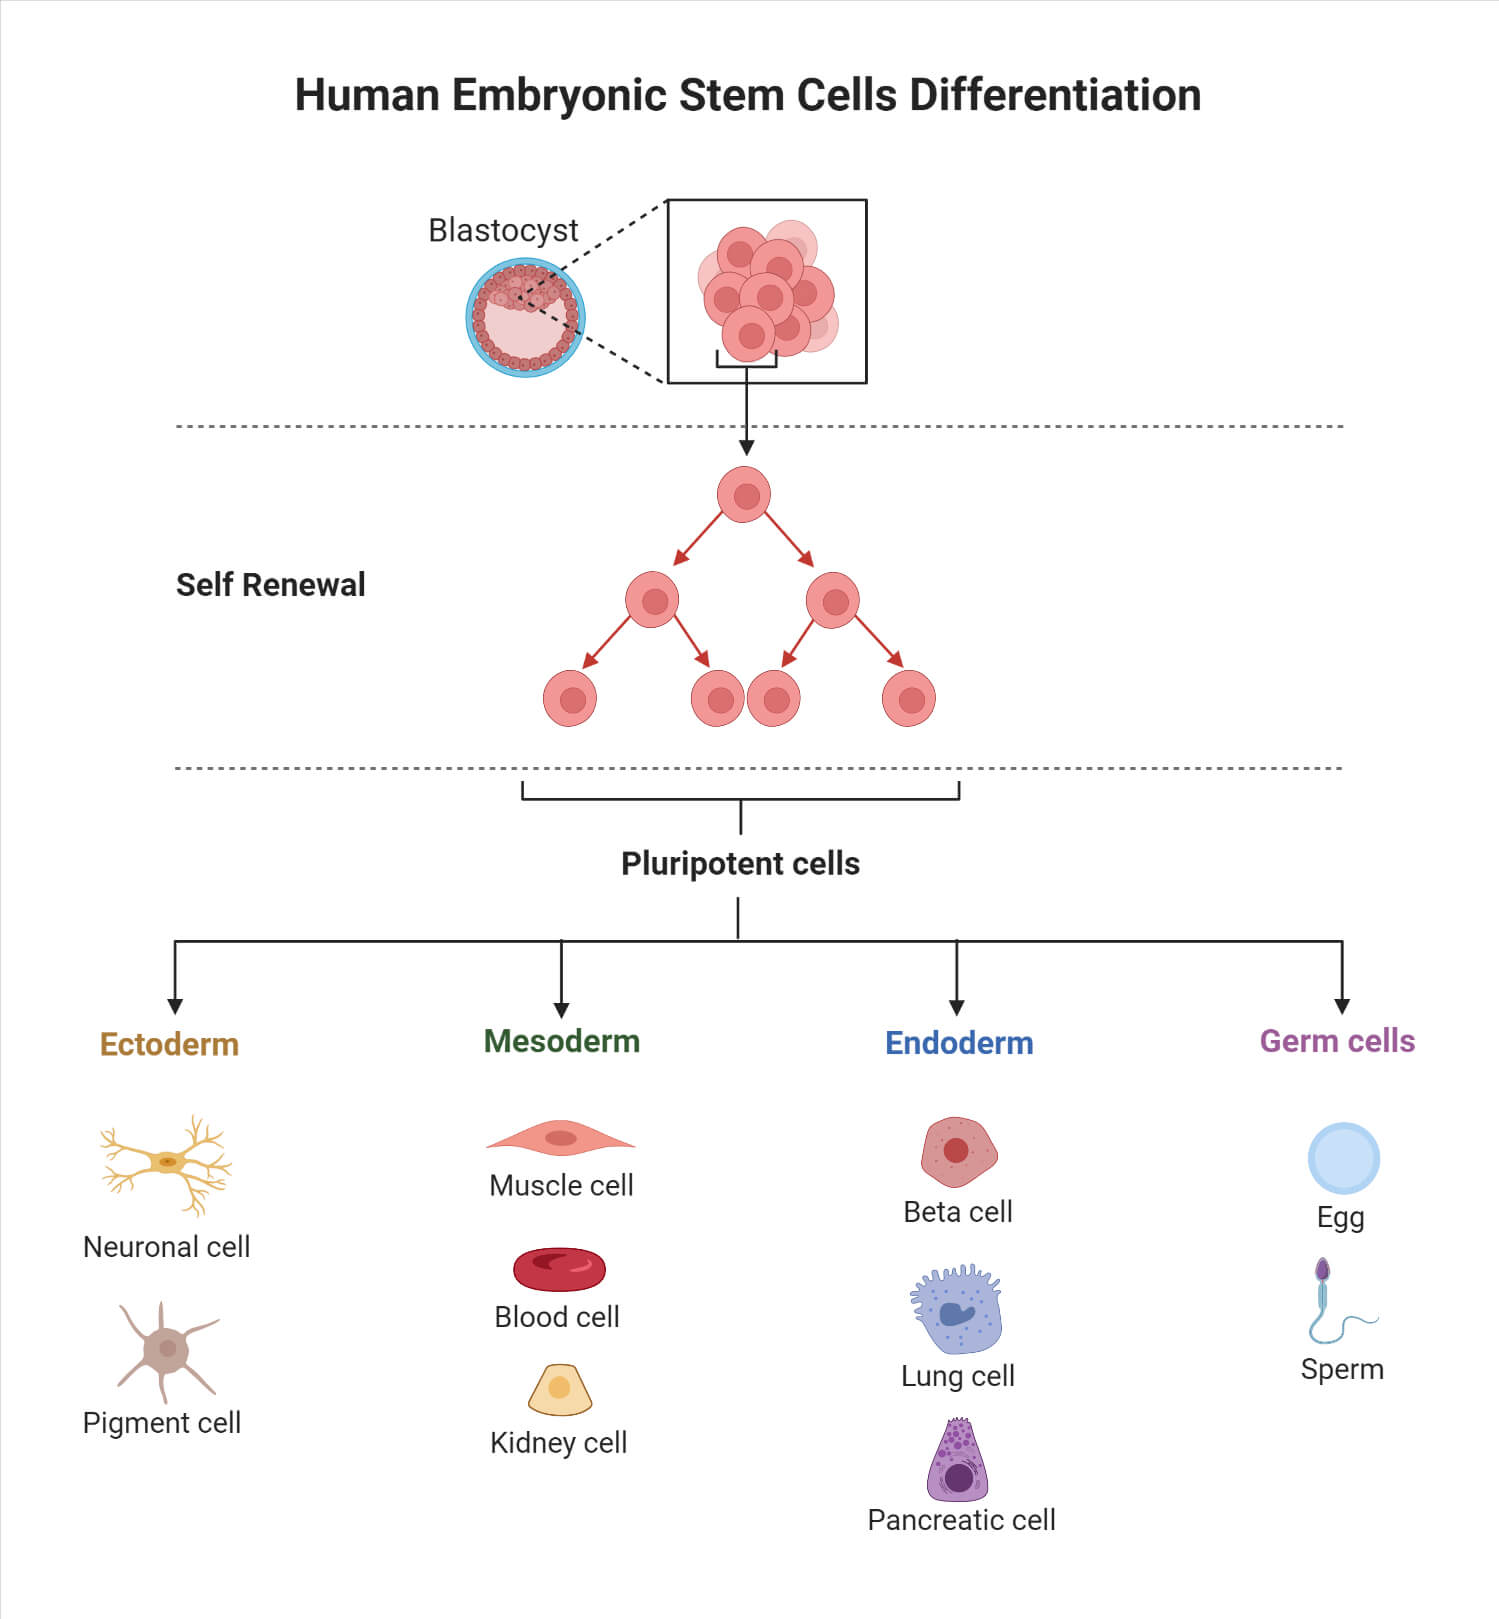 Human Embryonic Stem Cell Differentiation